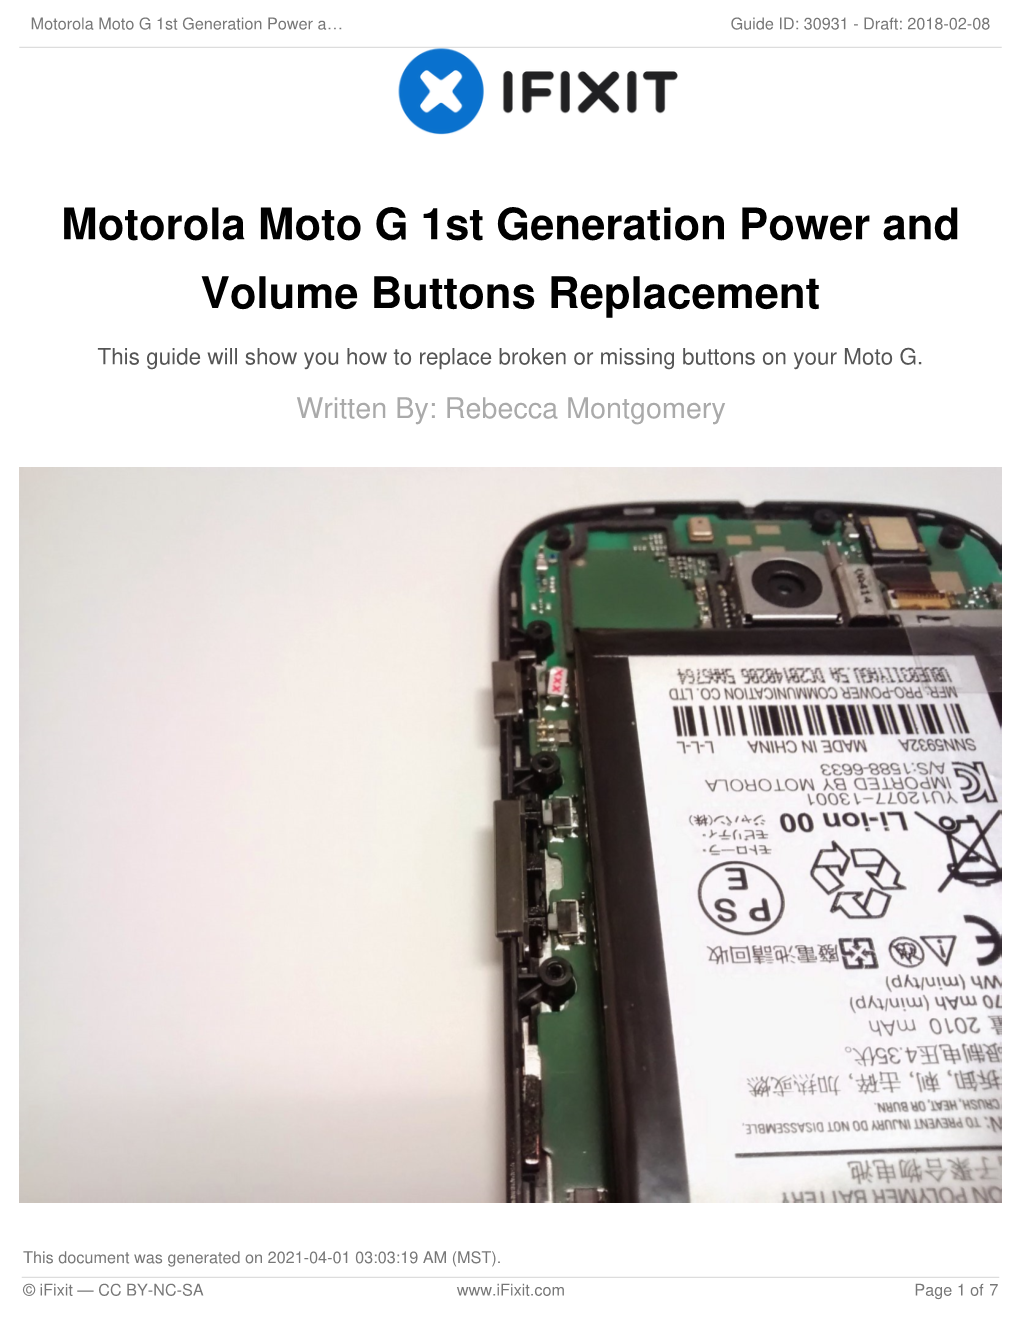 Motorola Moto G 1St Generation Power and Volume Buttons Replacement